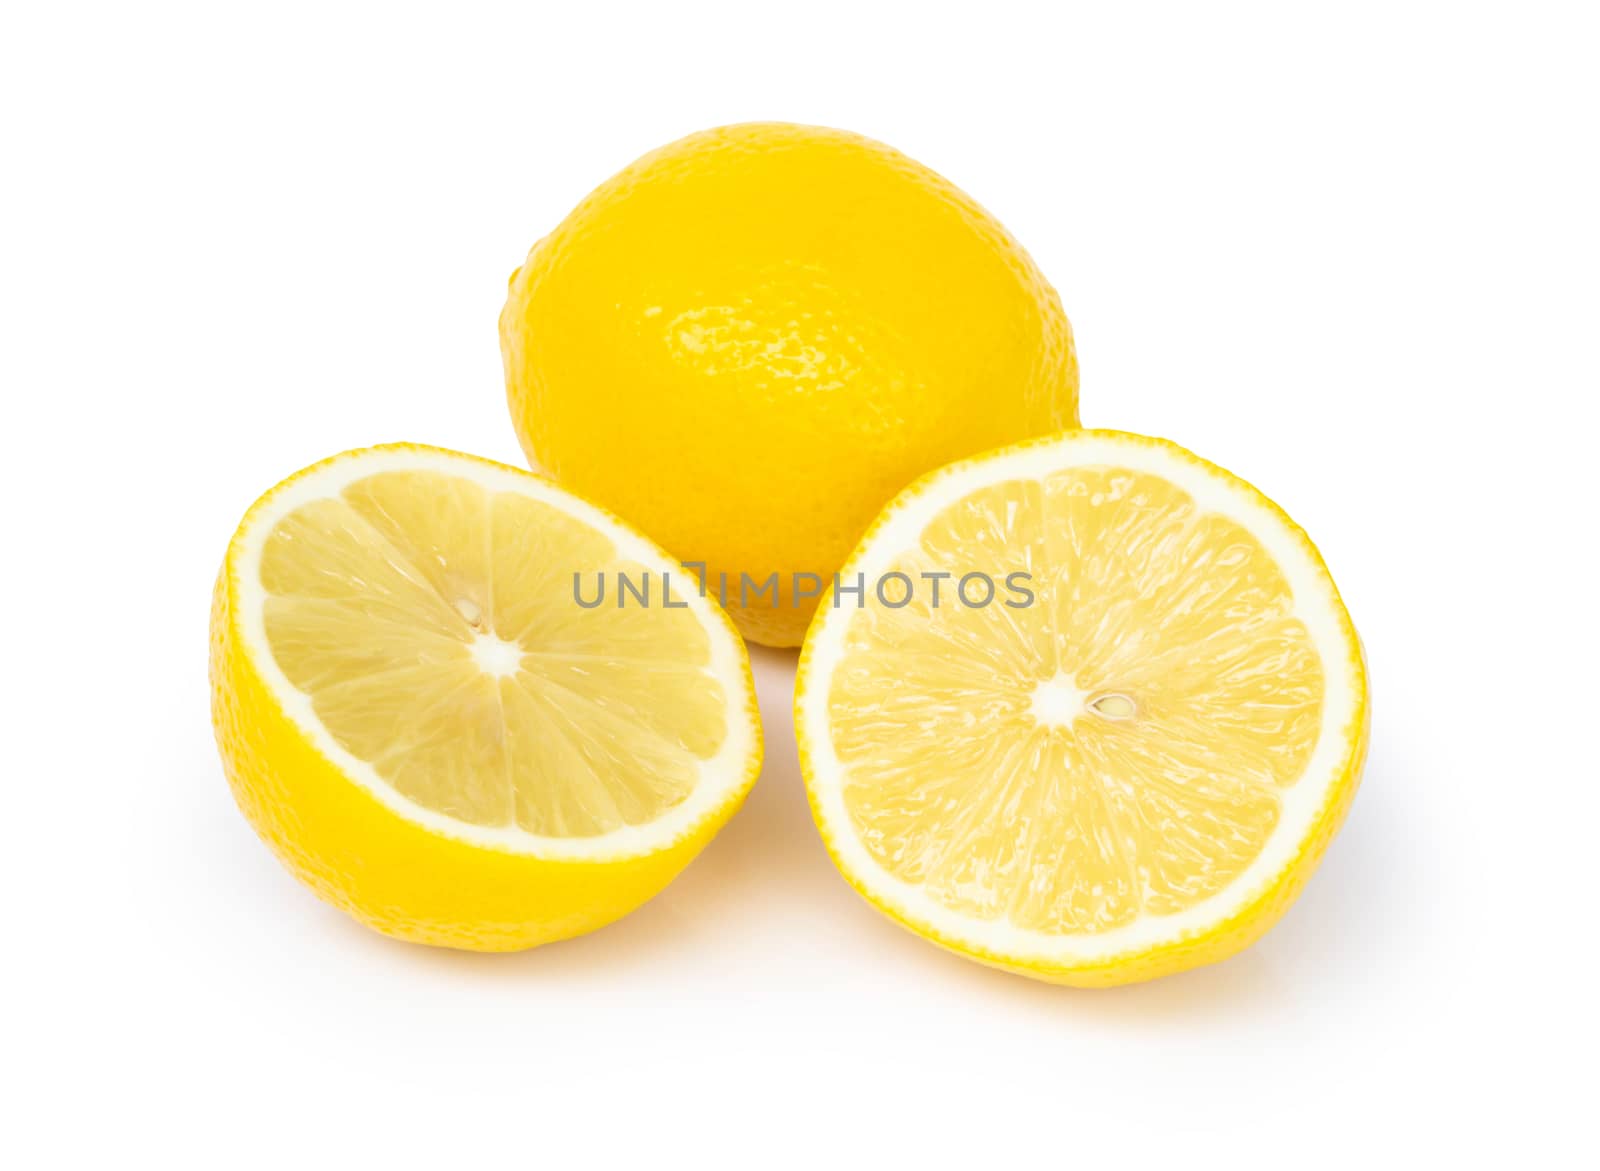 Closeup fresh lemon fruit slice on white background, food and healthy concept